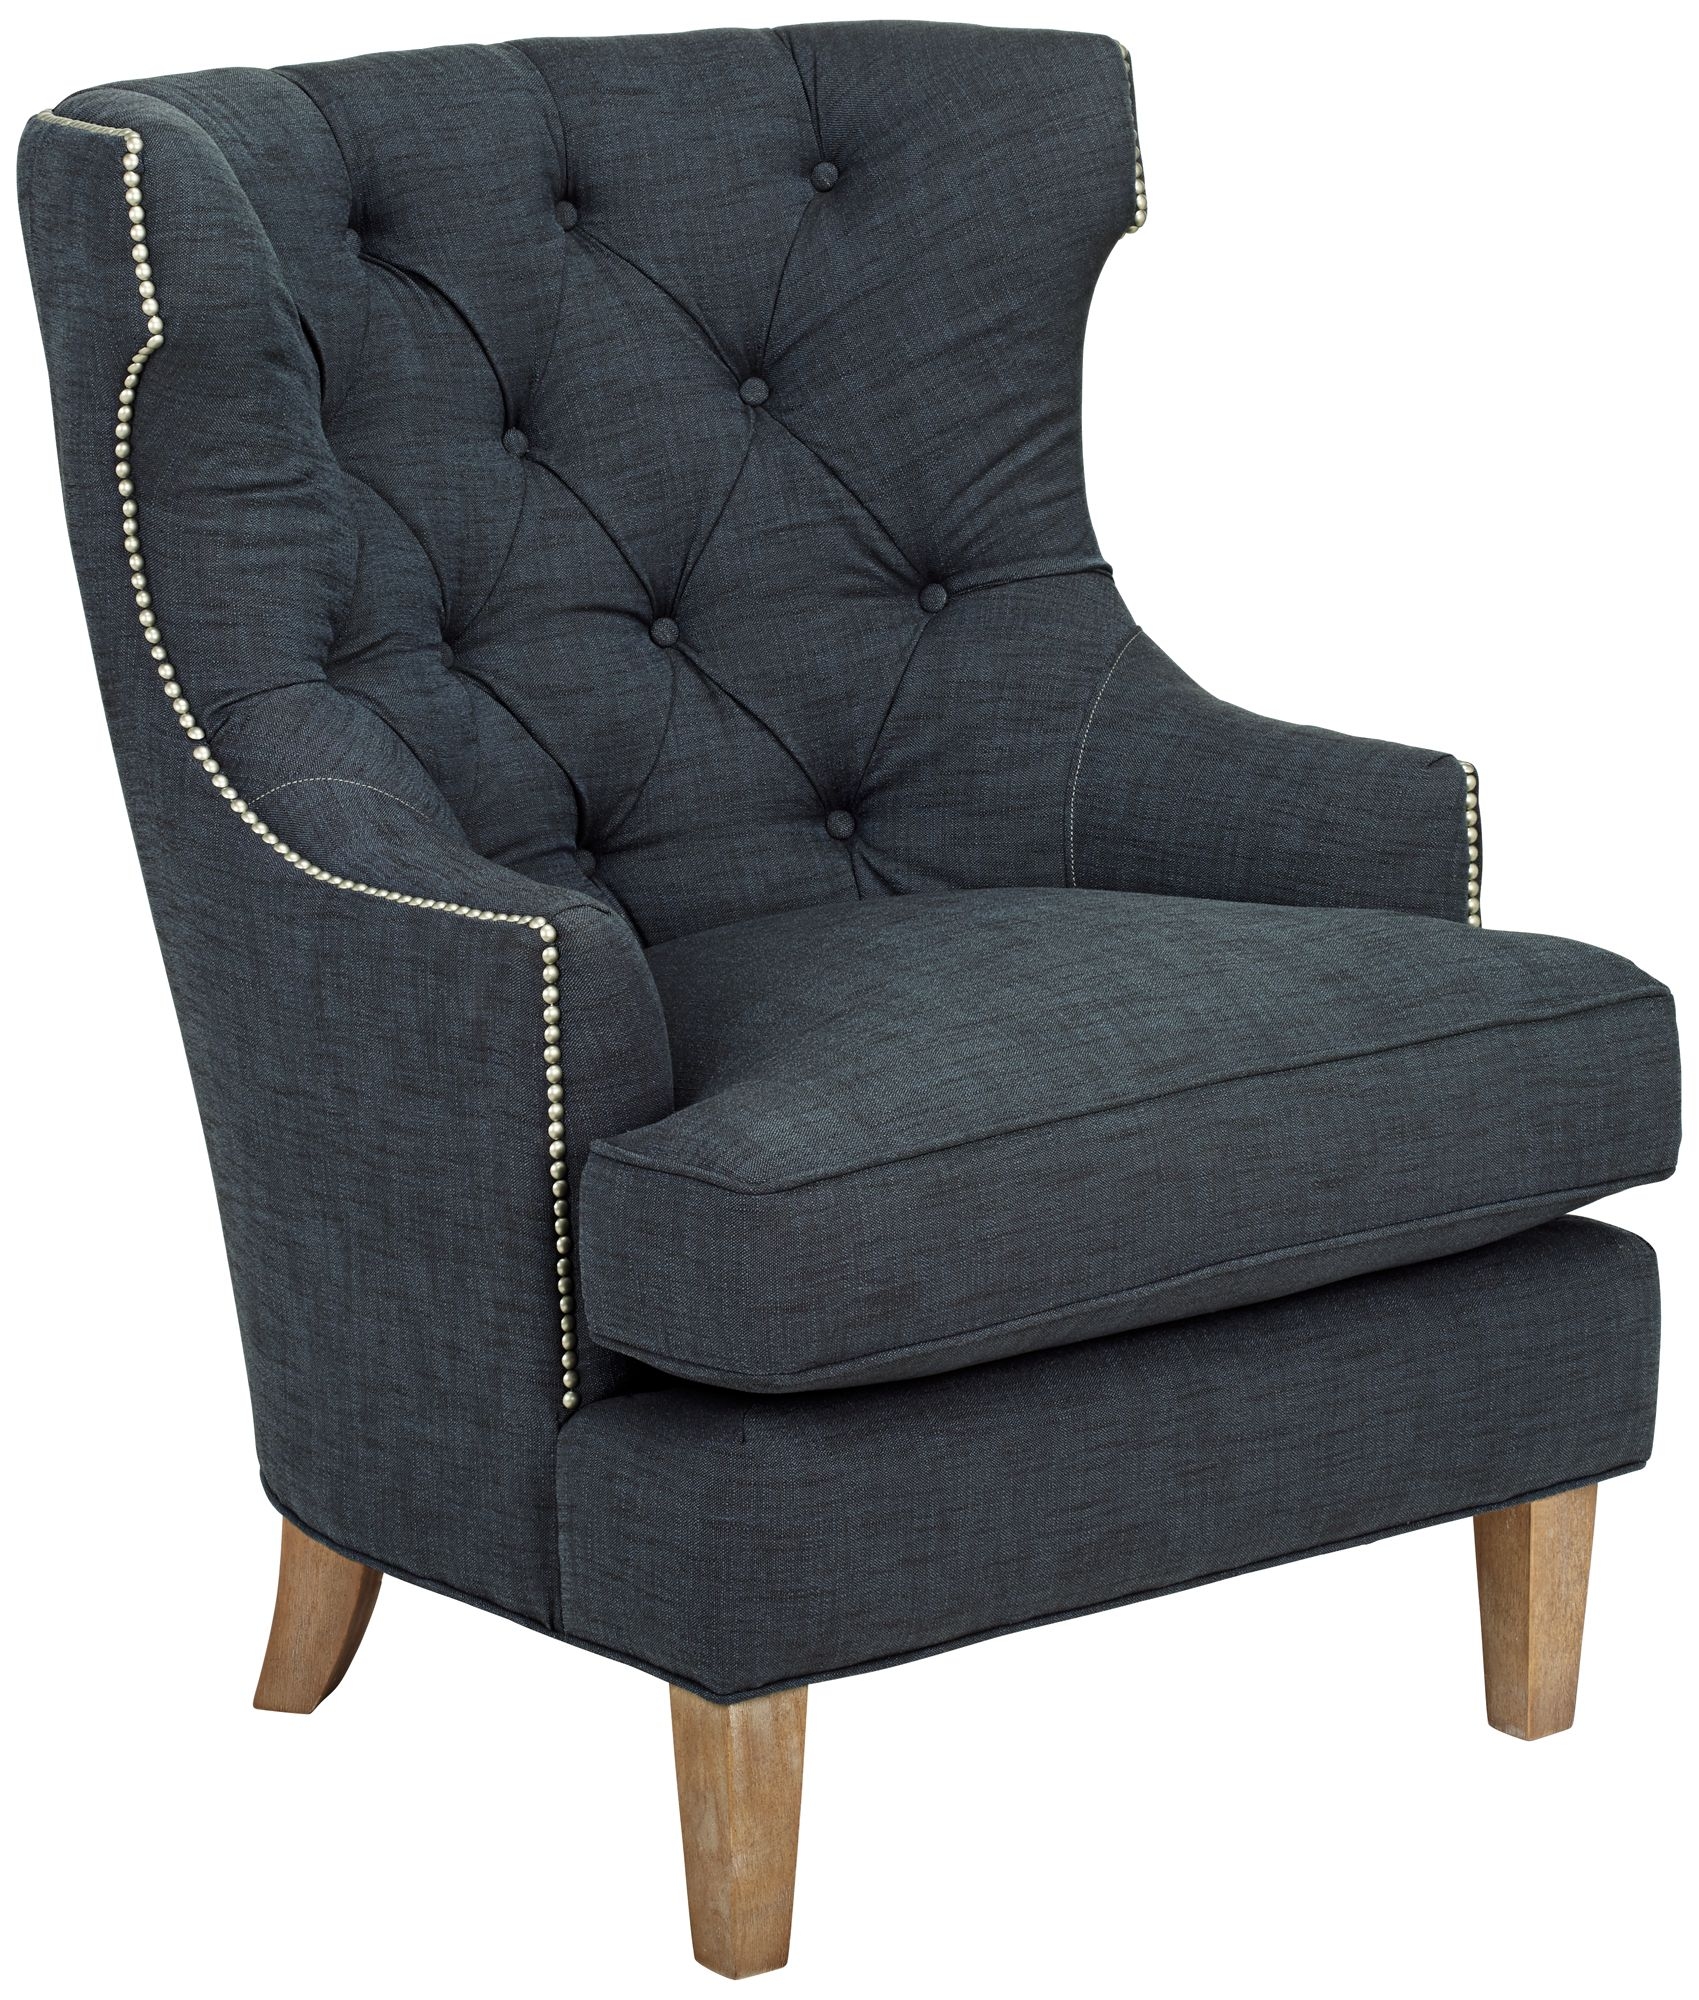 Reese Studio Indigo High-Back Accent Chair - Image 0